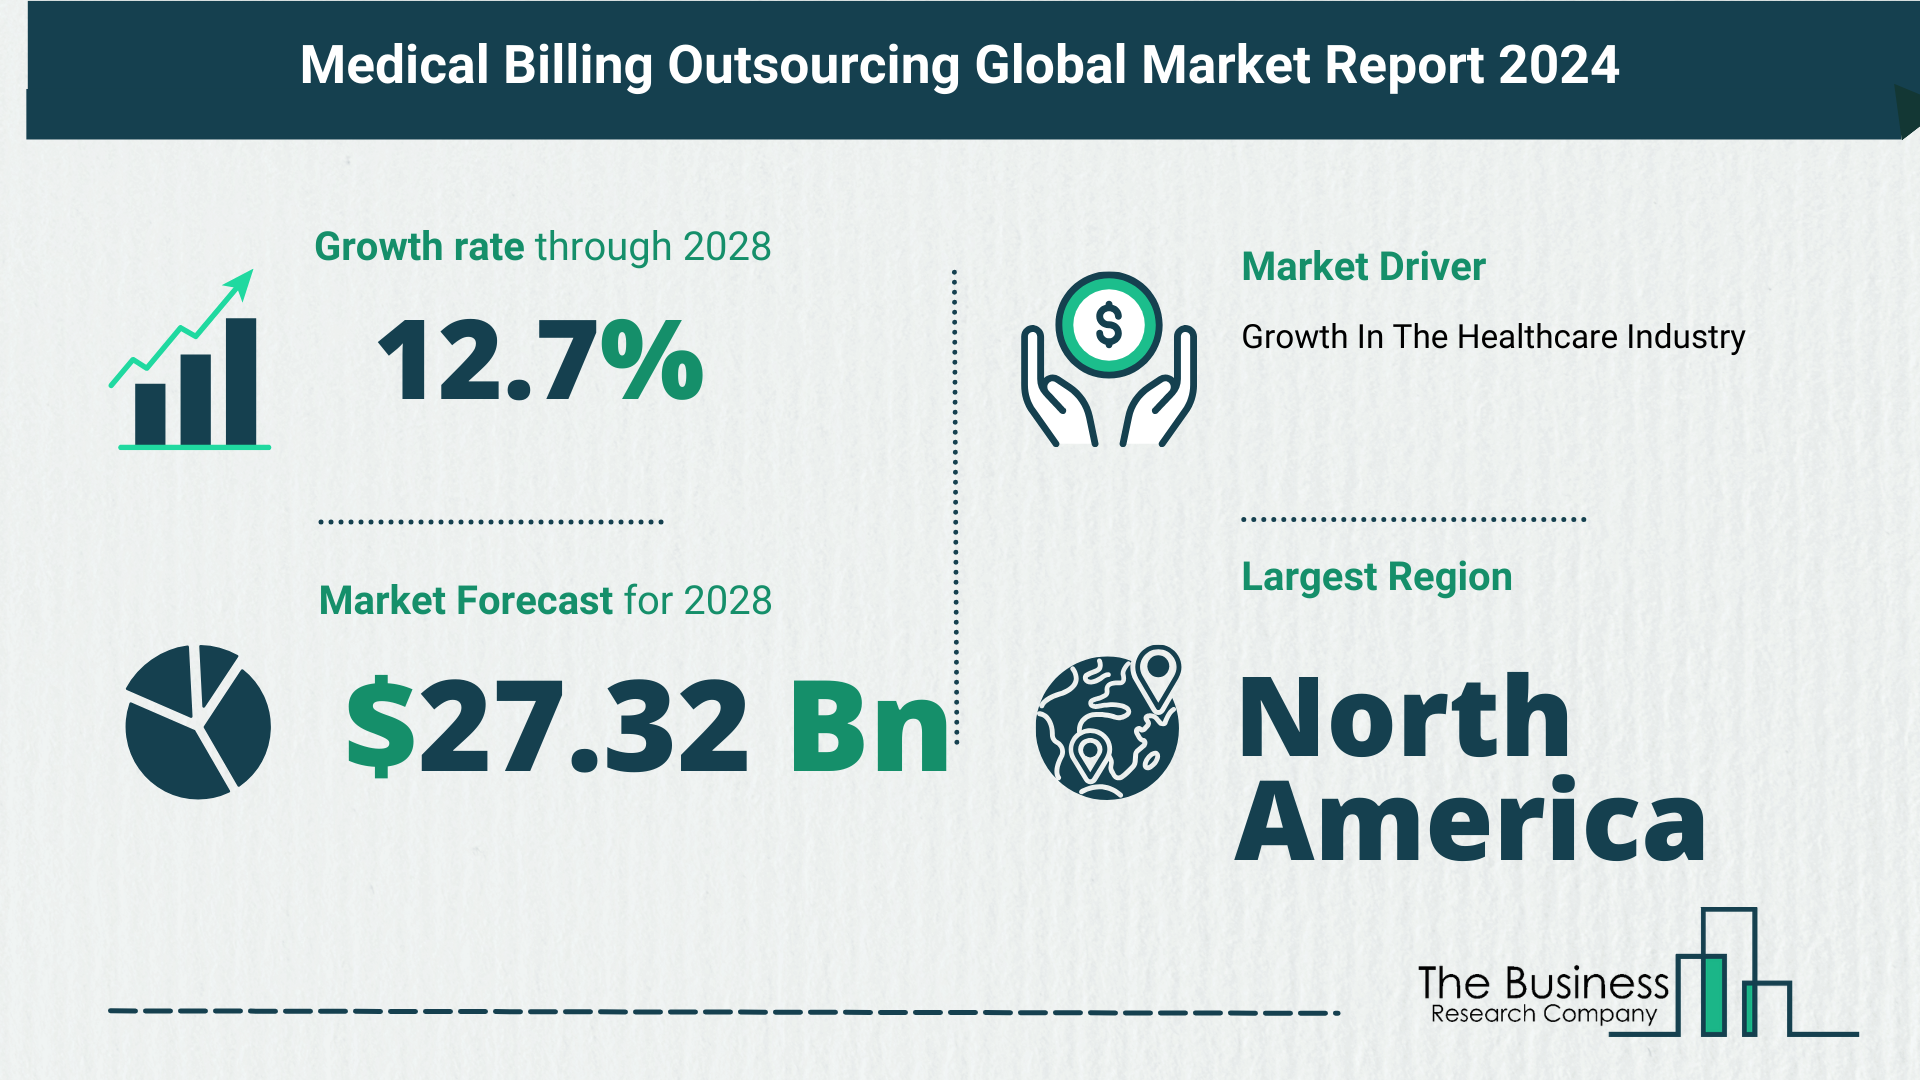 What Is The Forecast Growth Rate For The Medical Billing Outsourcing Market?